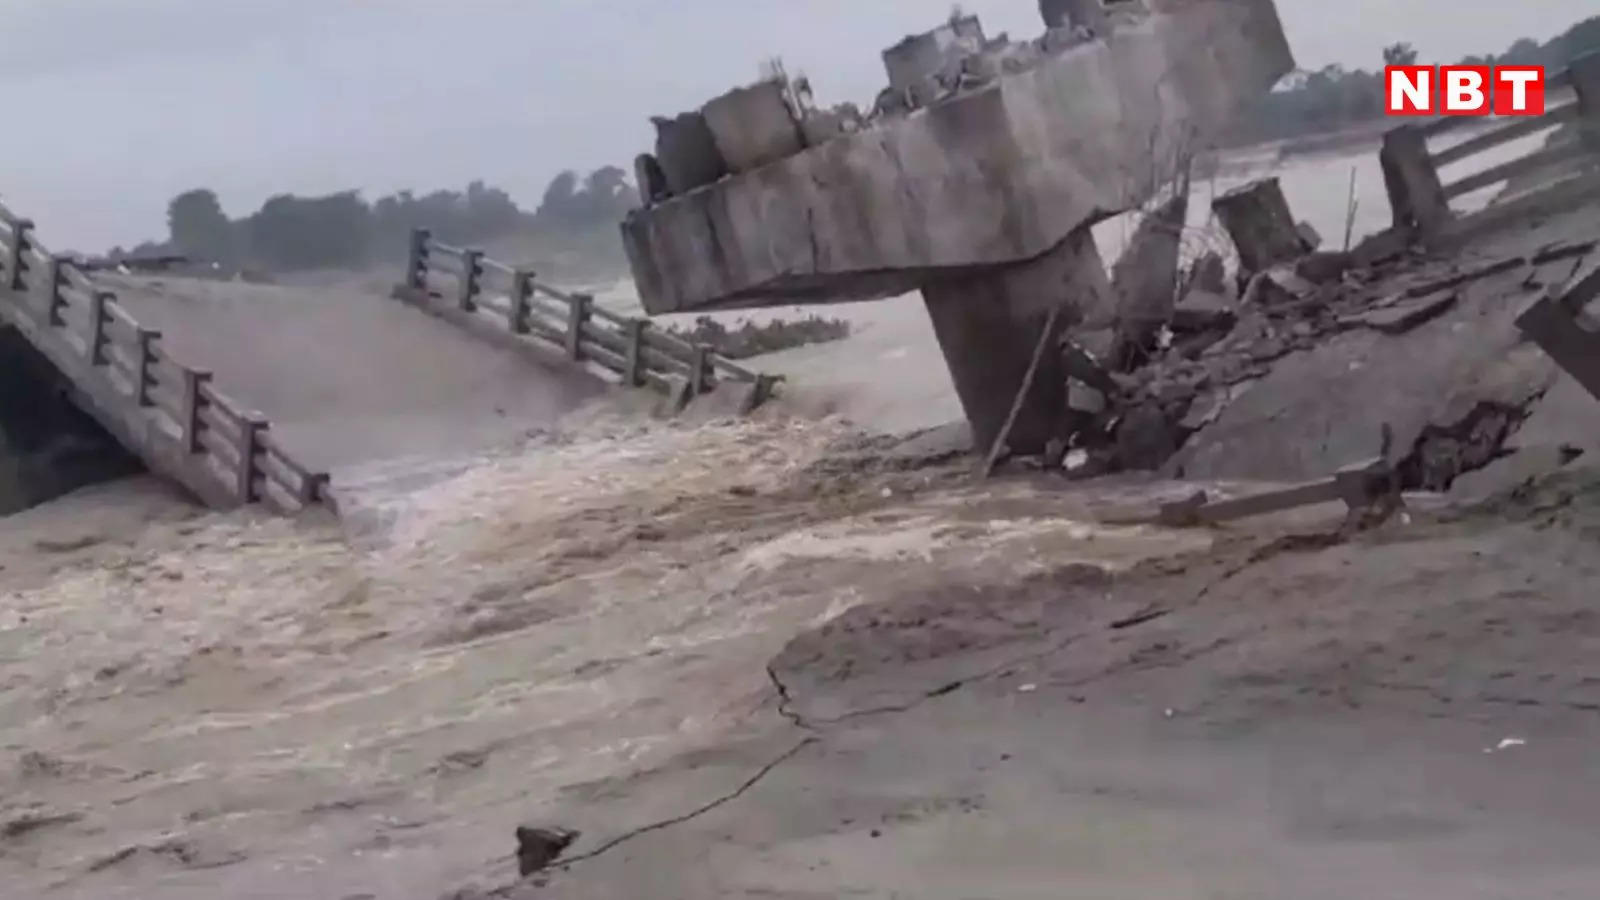 Another bridge collapses in Bihar, 5th incident in 11 days 